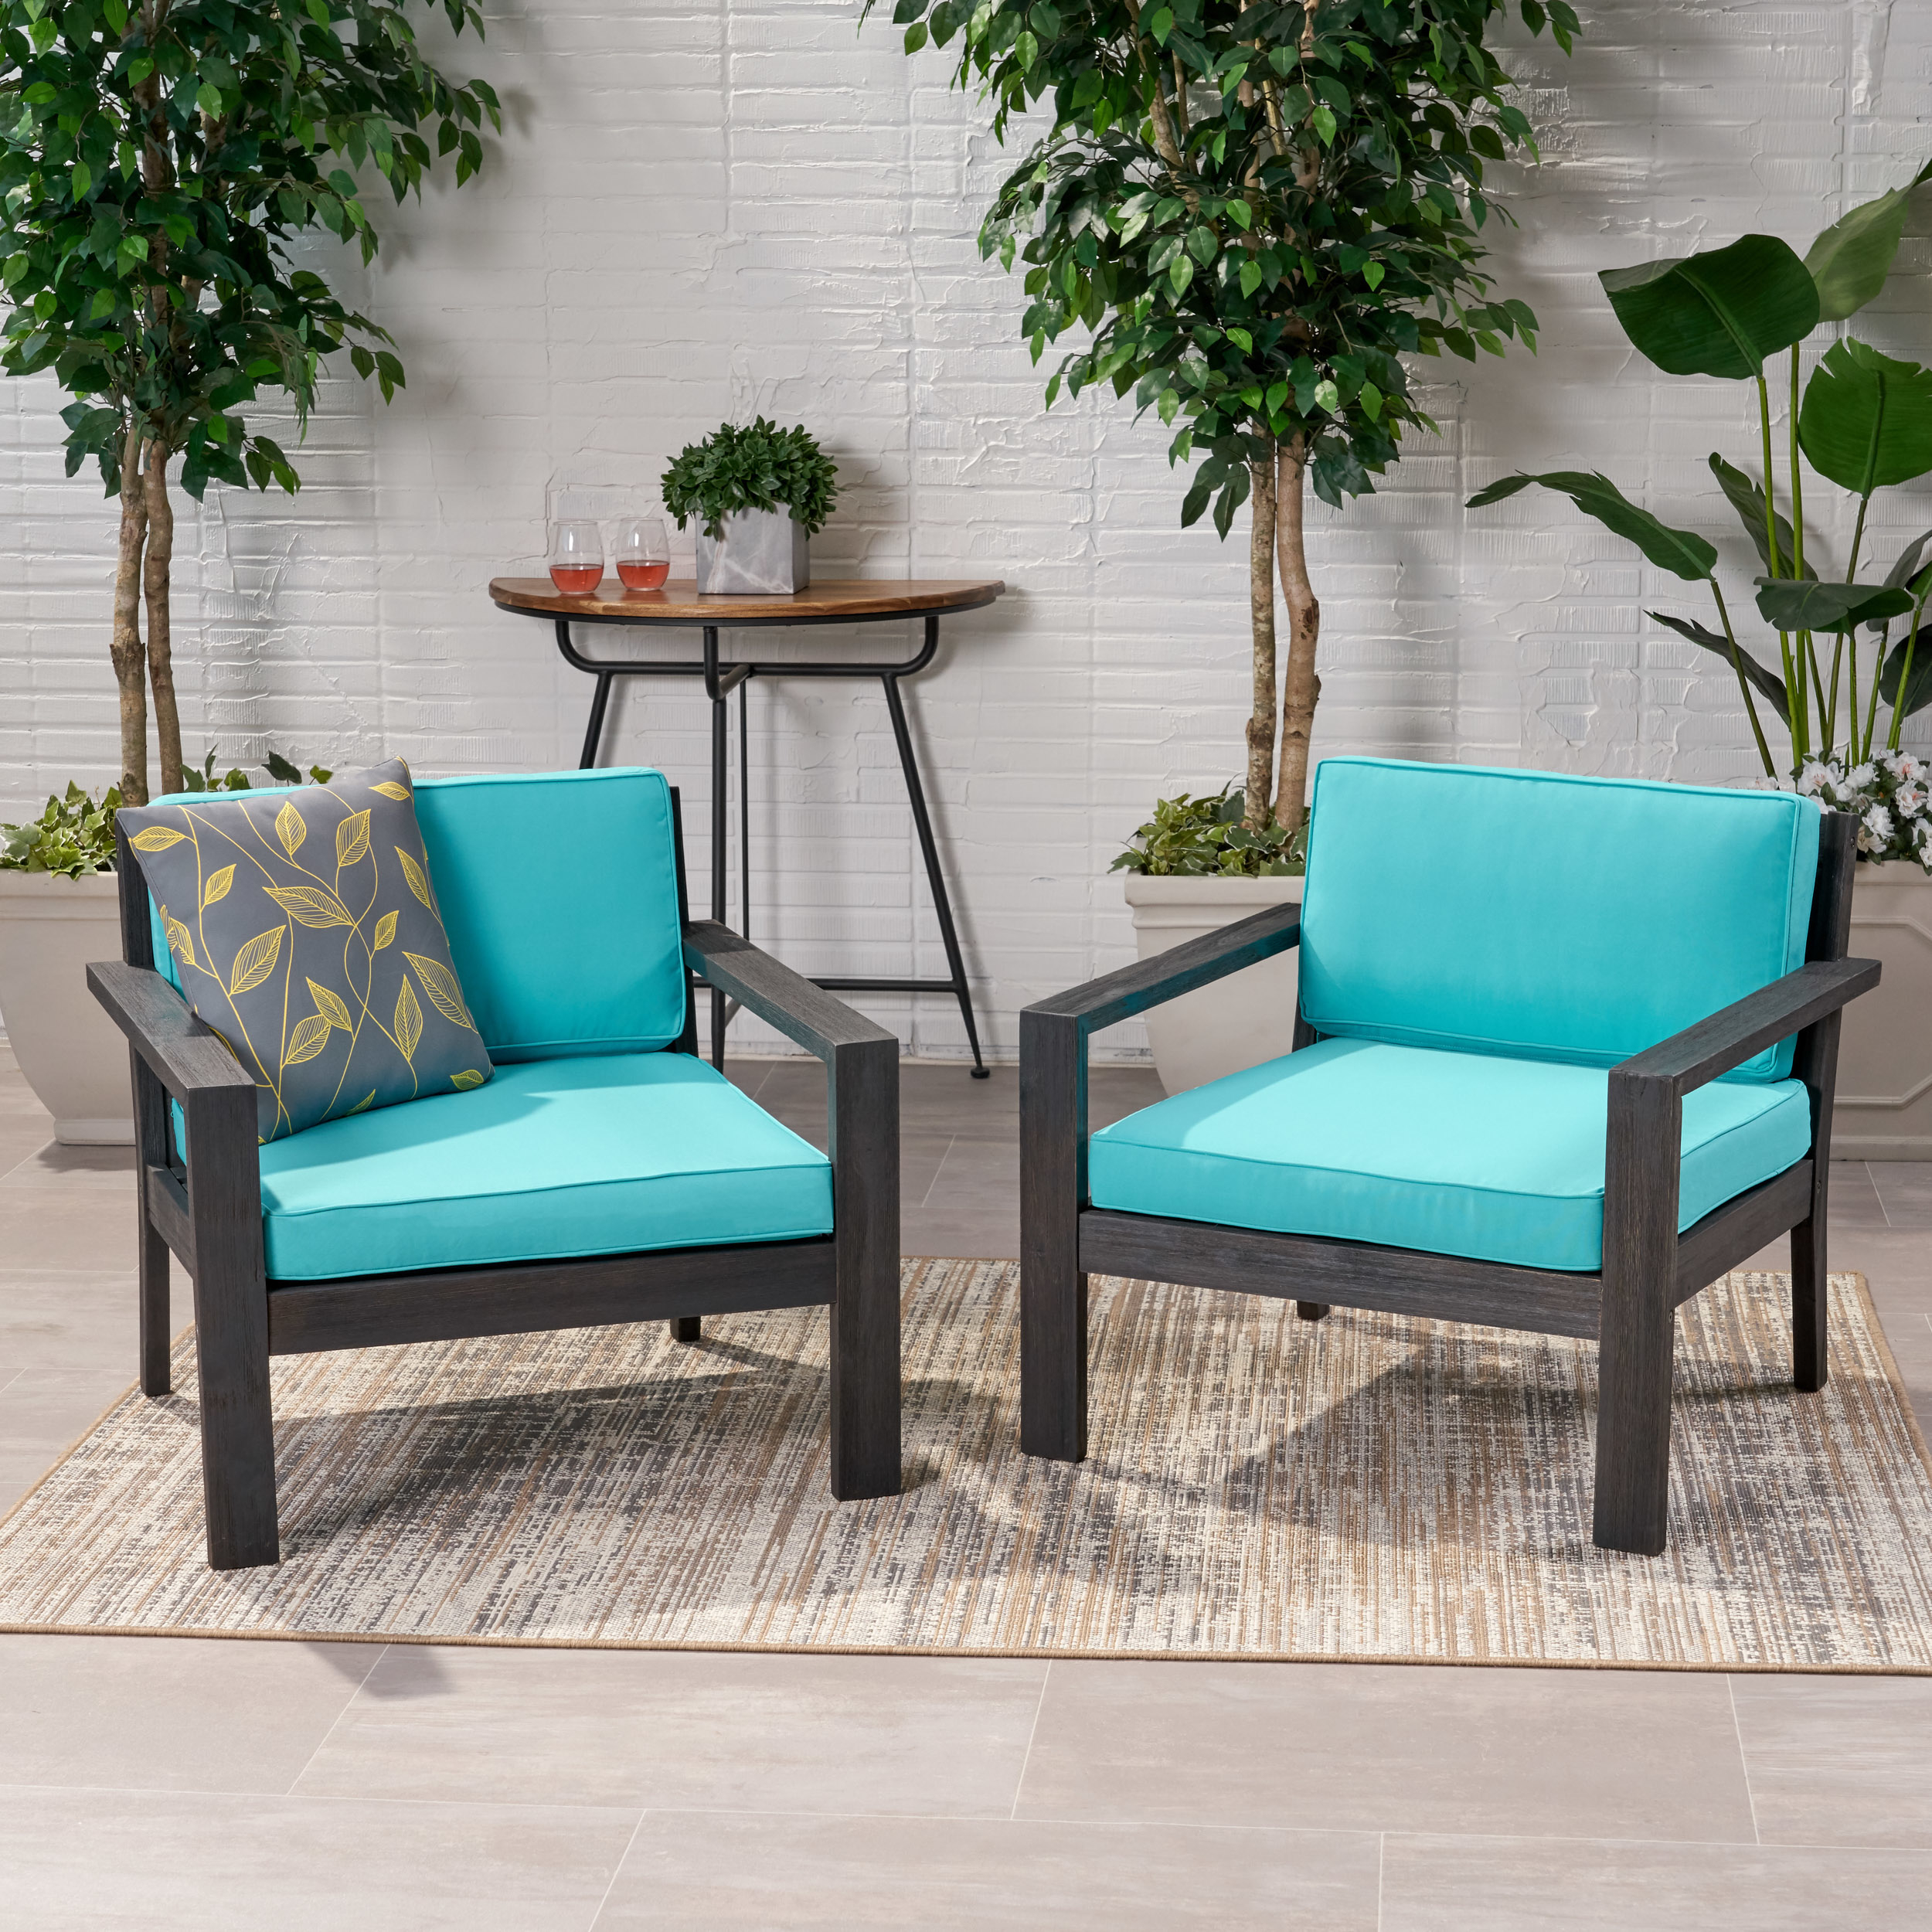 Susan Outdoor Acacia Wood Club Chairs With Cushions (Set Of 2) - Brushed Dark Gray Finish, Teal